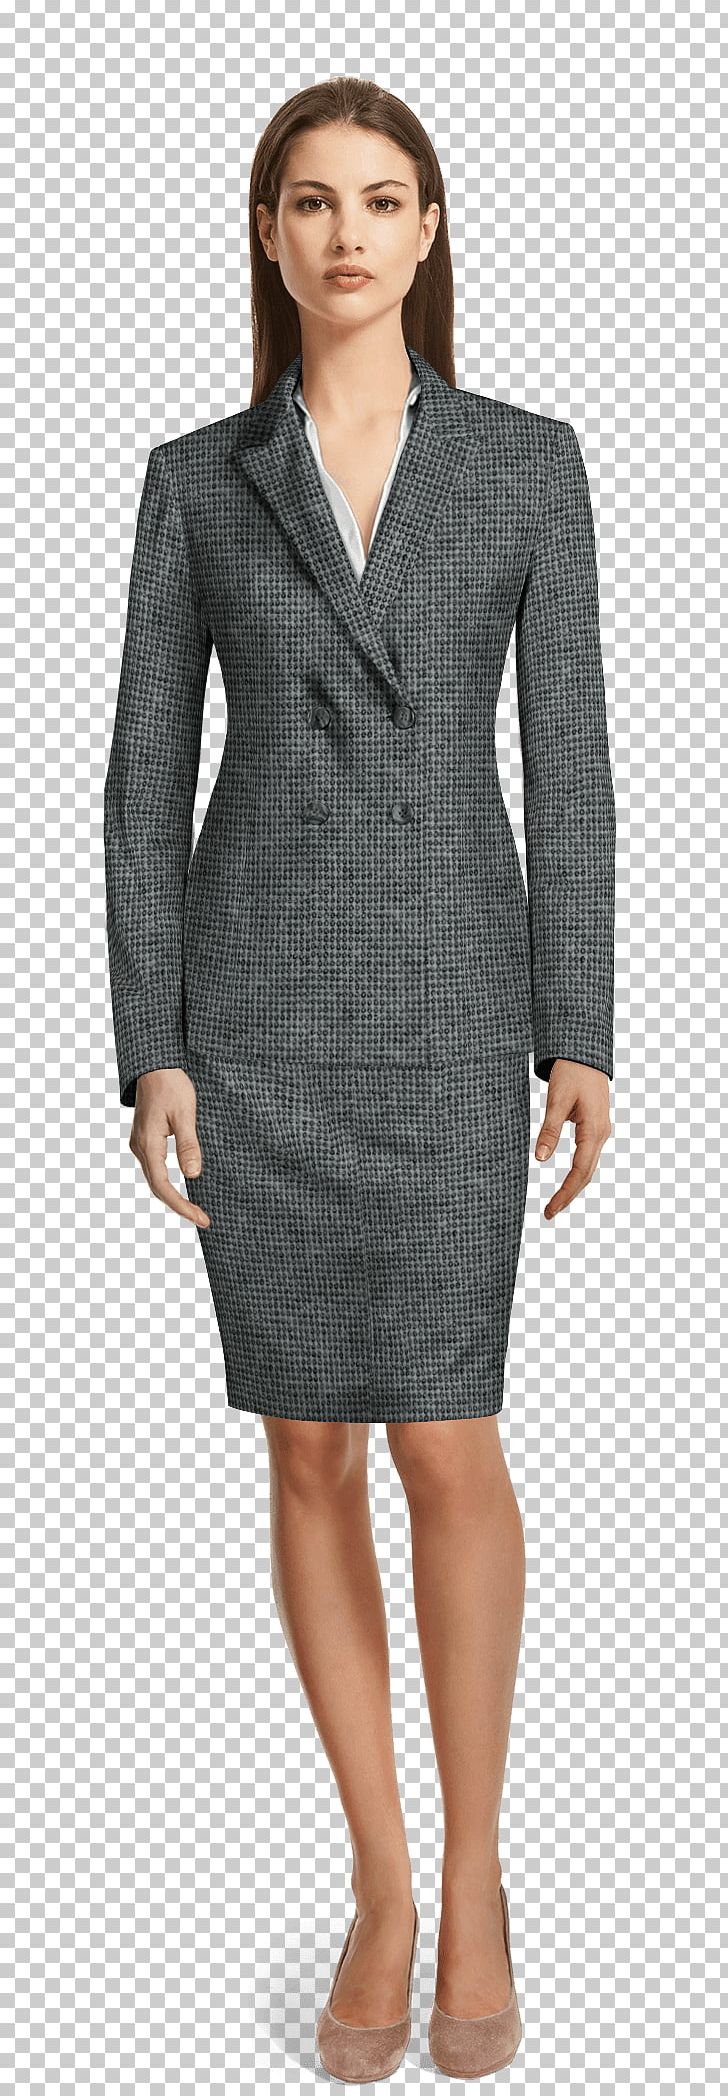 Suit Lapel Double-breasted Clothing Jakkupuku PNG, Clipart, Blazer, Clothing, Coat, Custom, Day Dress Free PNG Download